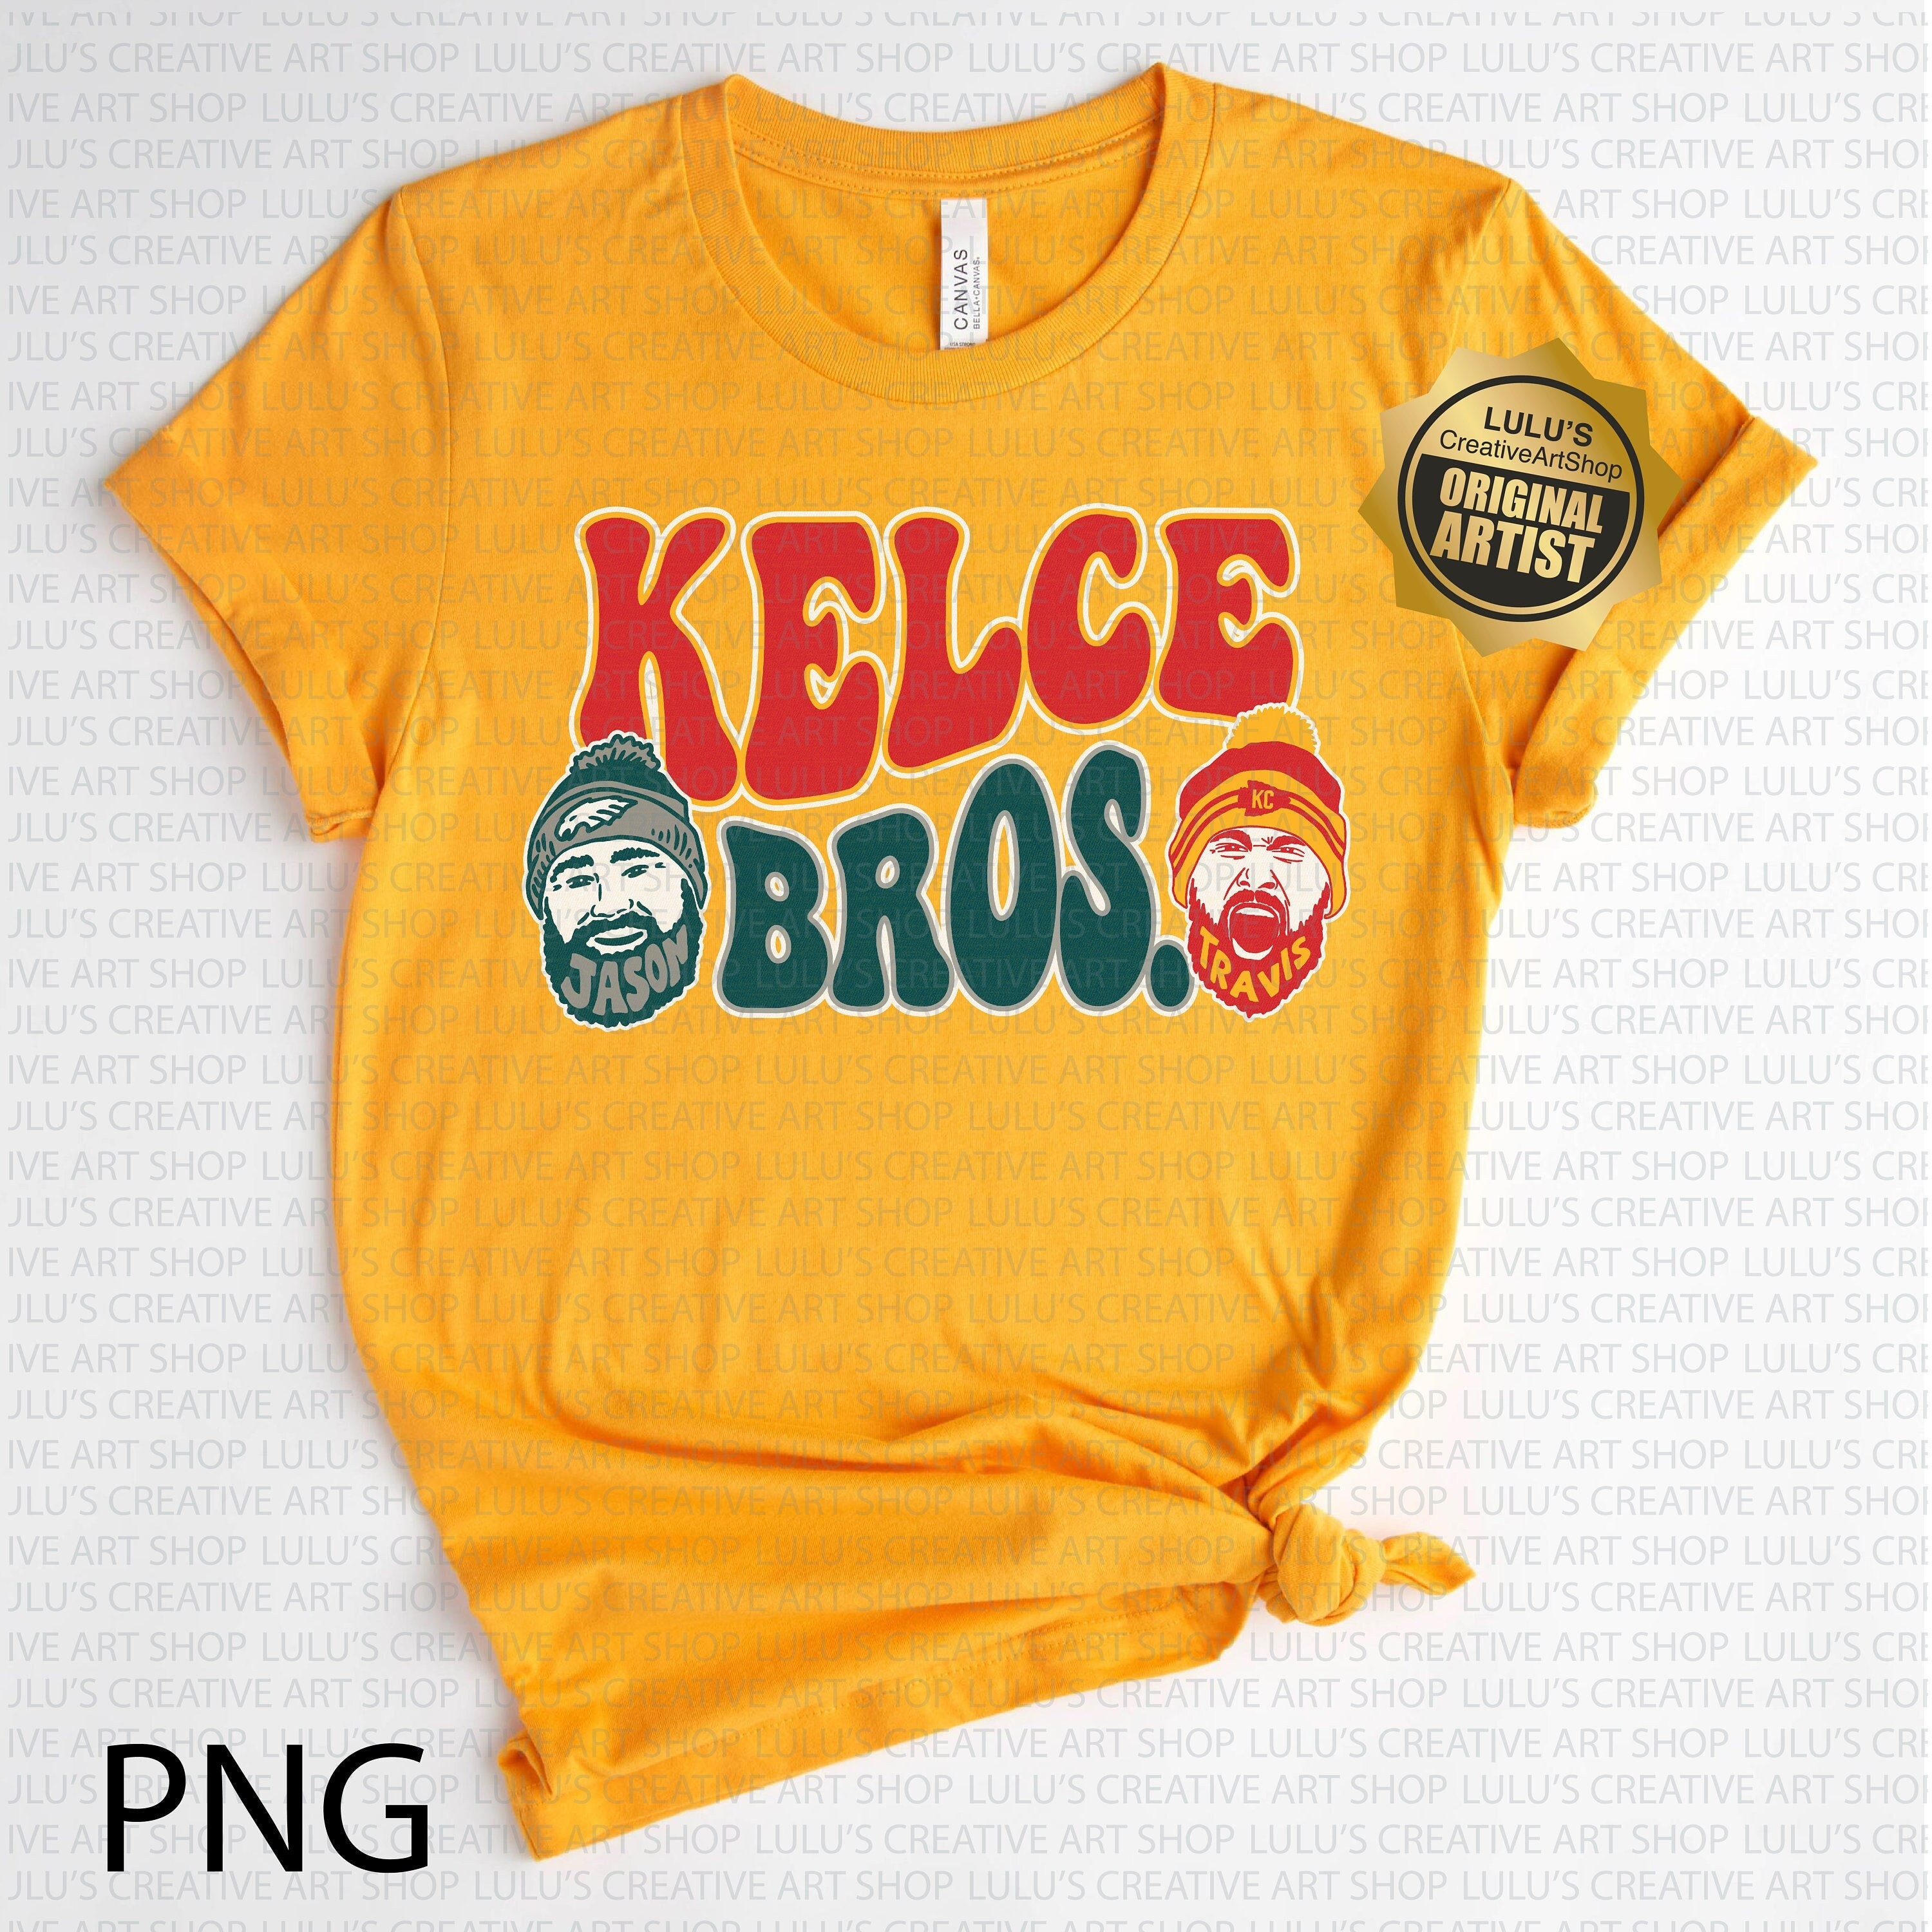 Kelce Brothers png-Kelce Bros png-jason kelce png-travis kelce png-mahomes png-swifty png